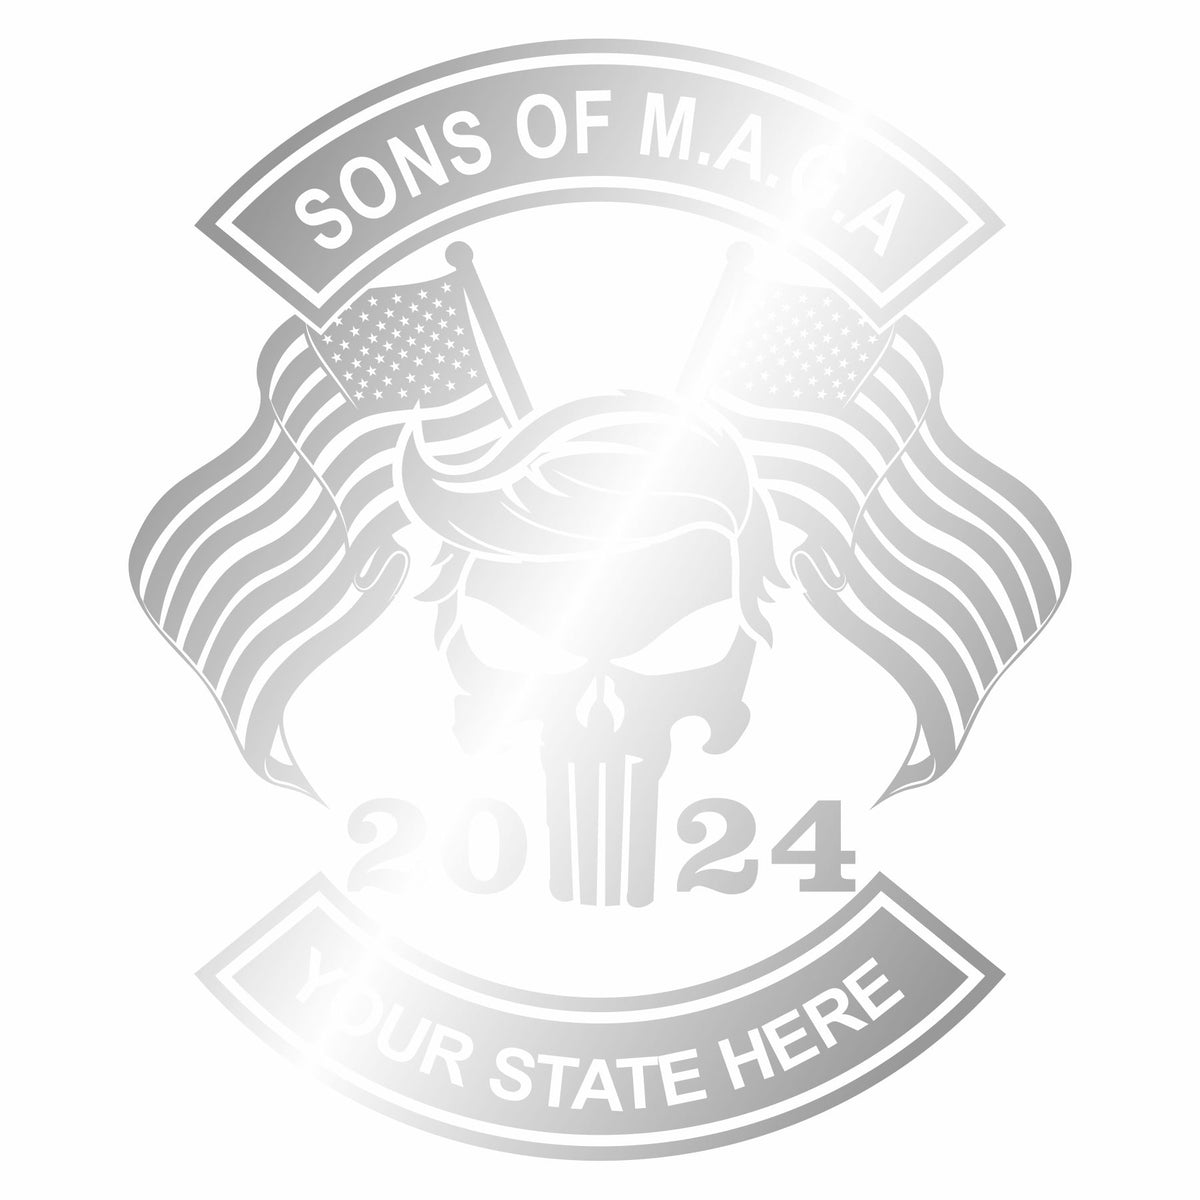 Sons of Maga - Your State - Vinyl Decal - Free Shipping